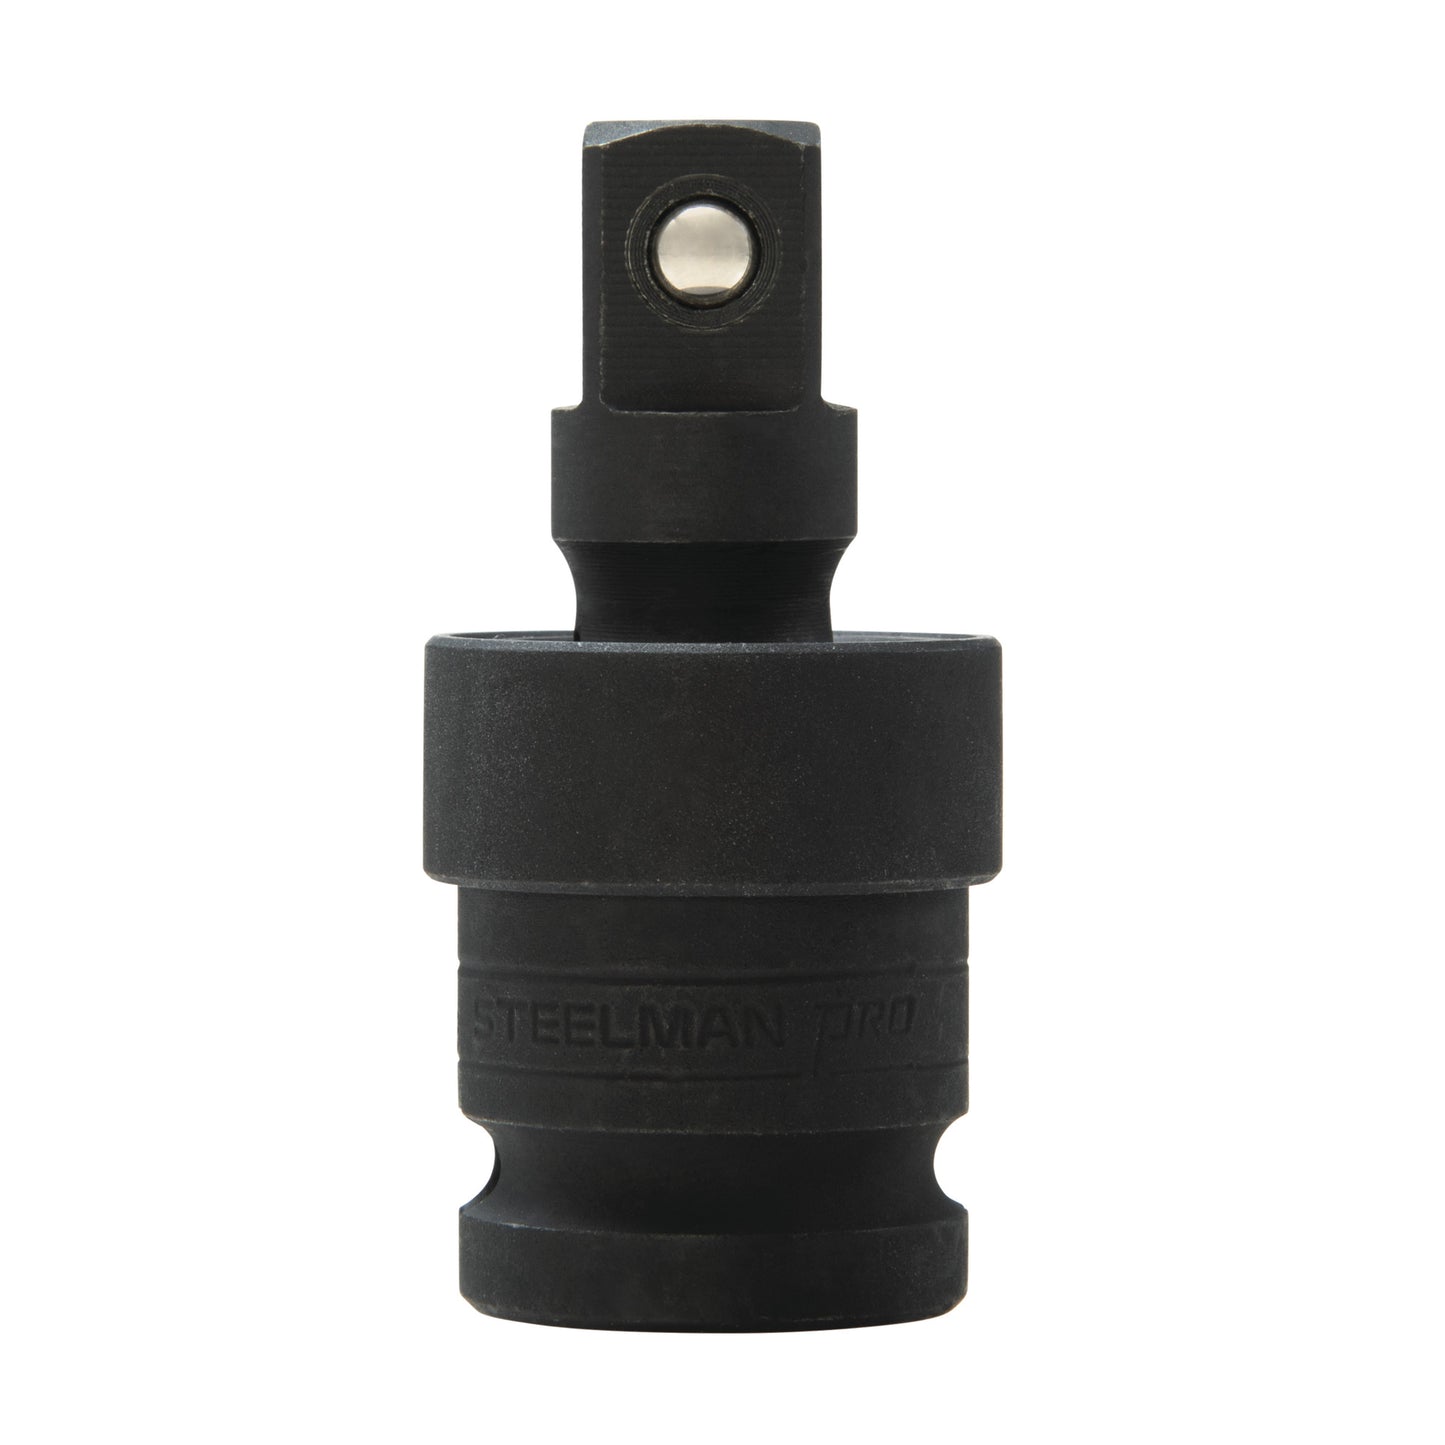 1/2-inch Drive Universal Joint Impact Adapter